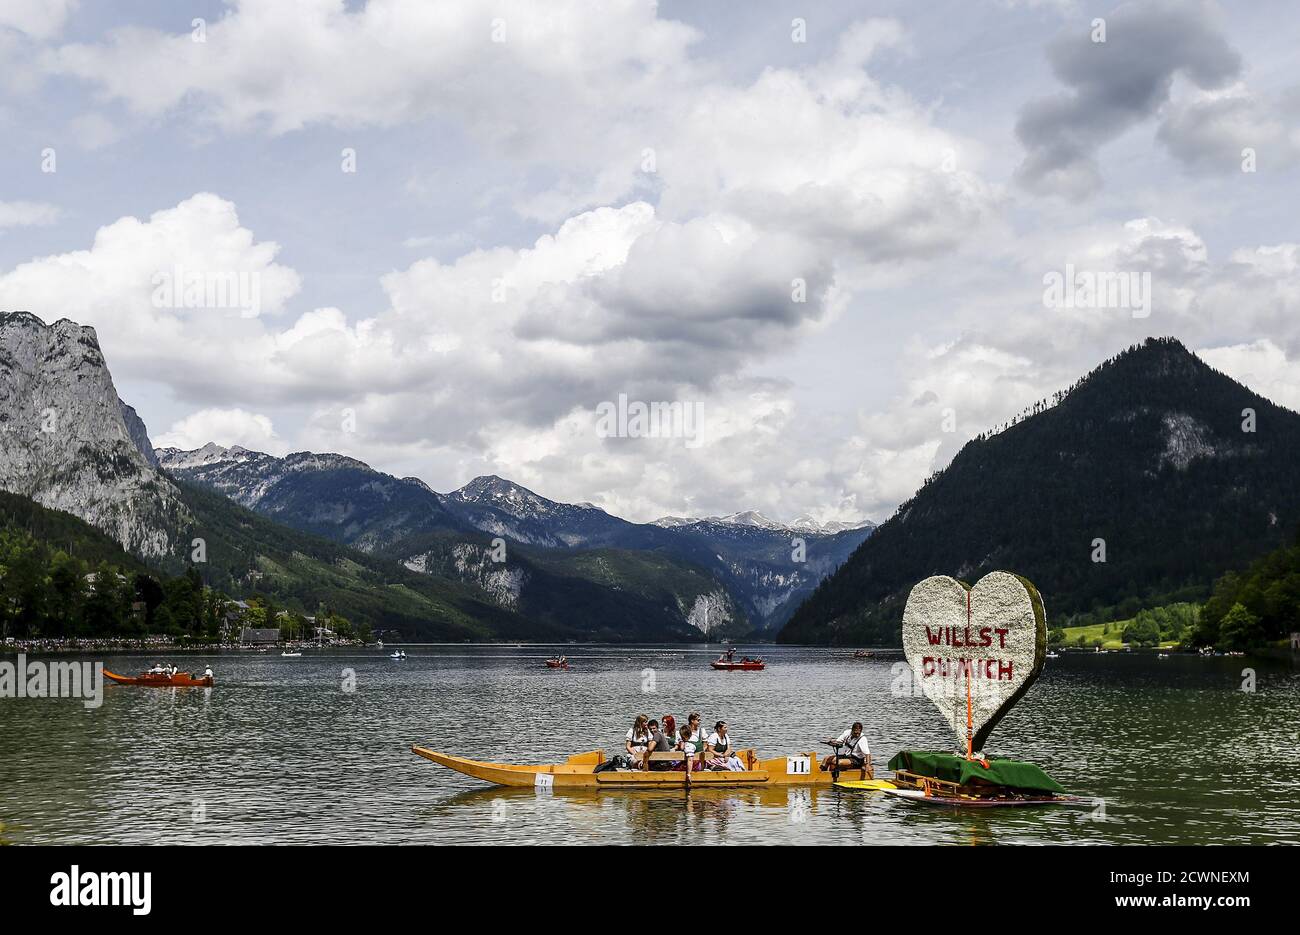 7 - Lifestyle Images High Resolution Stock Photography and Images - Alamy